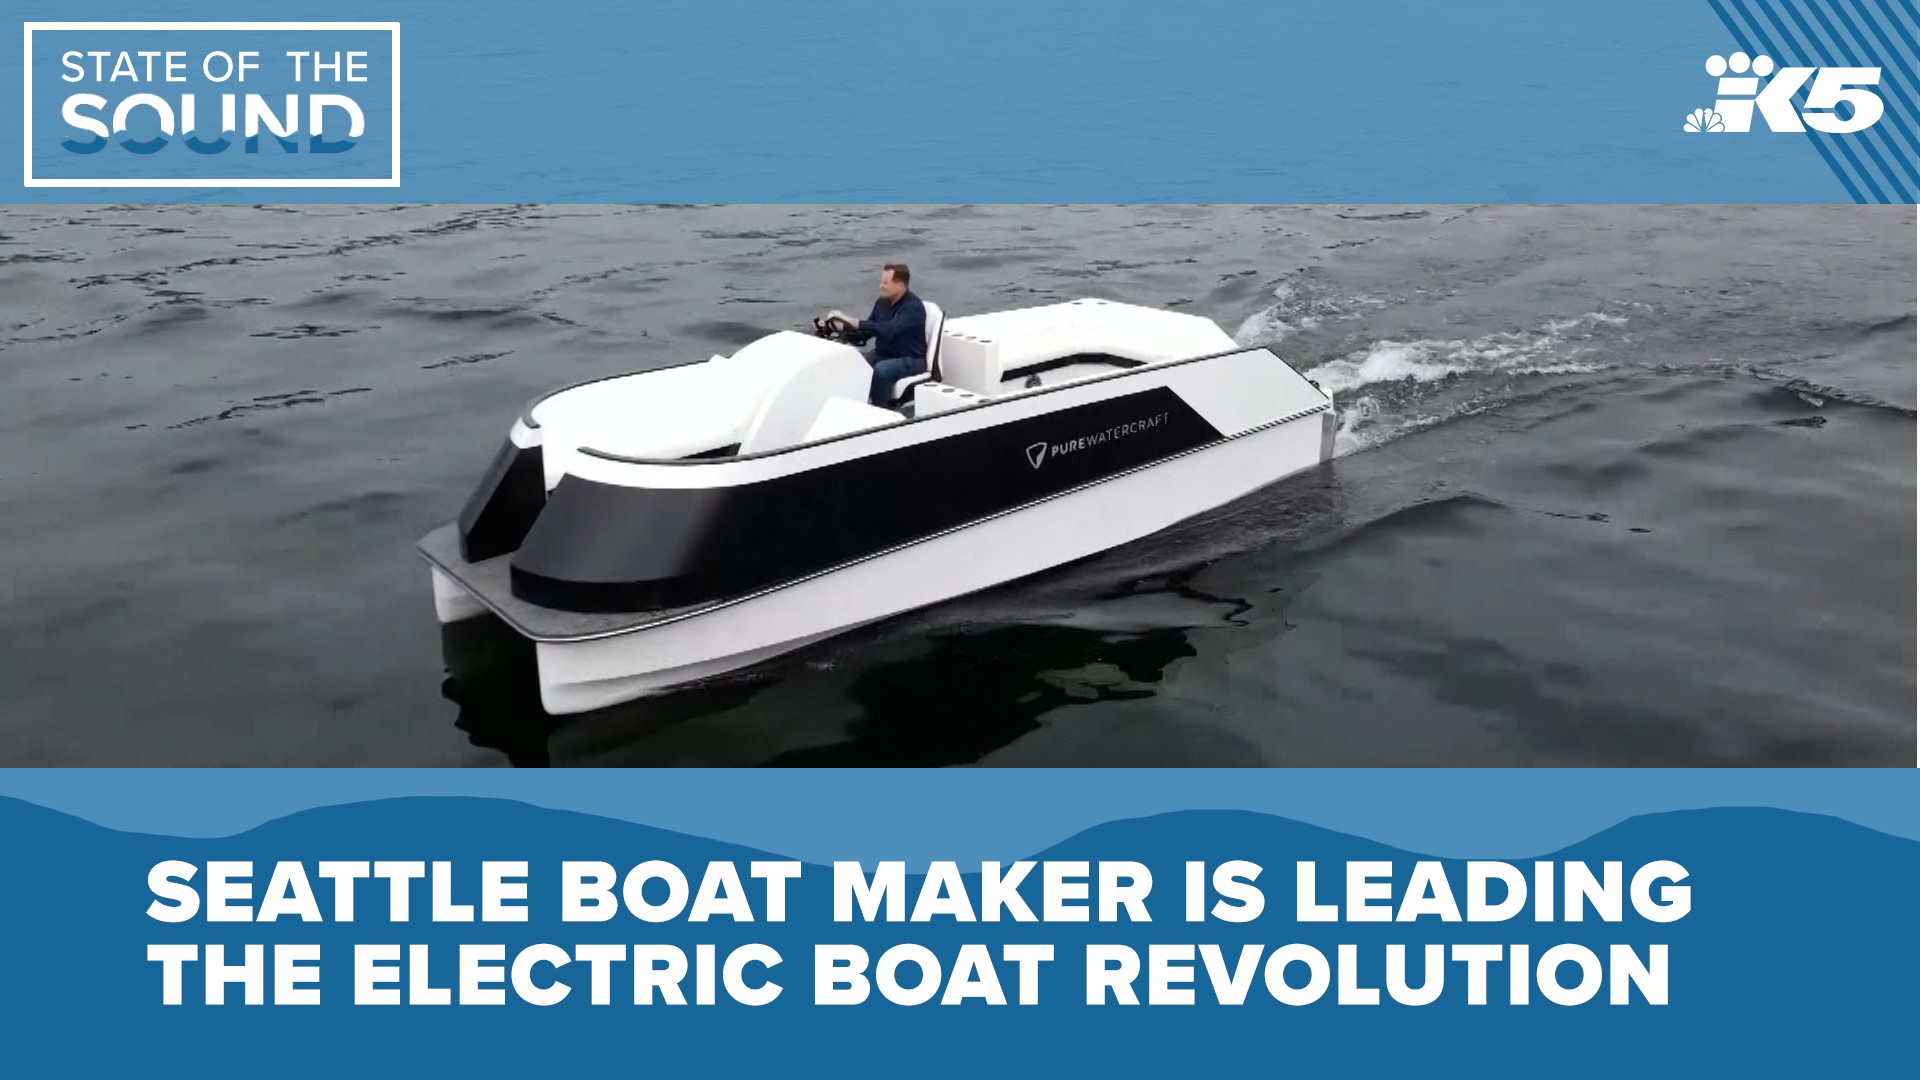 From a start-up on Lake Union to the Washington State Ferries system, the Puget Sound region is proving to be a leader in electrifying water transportation.